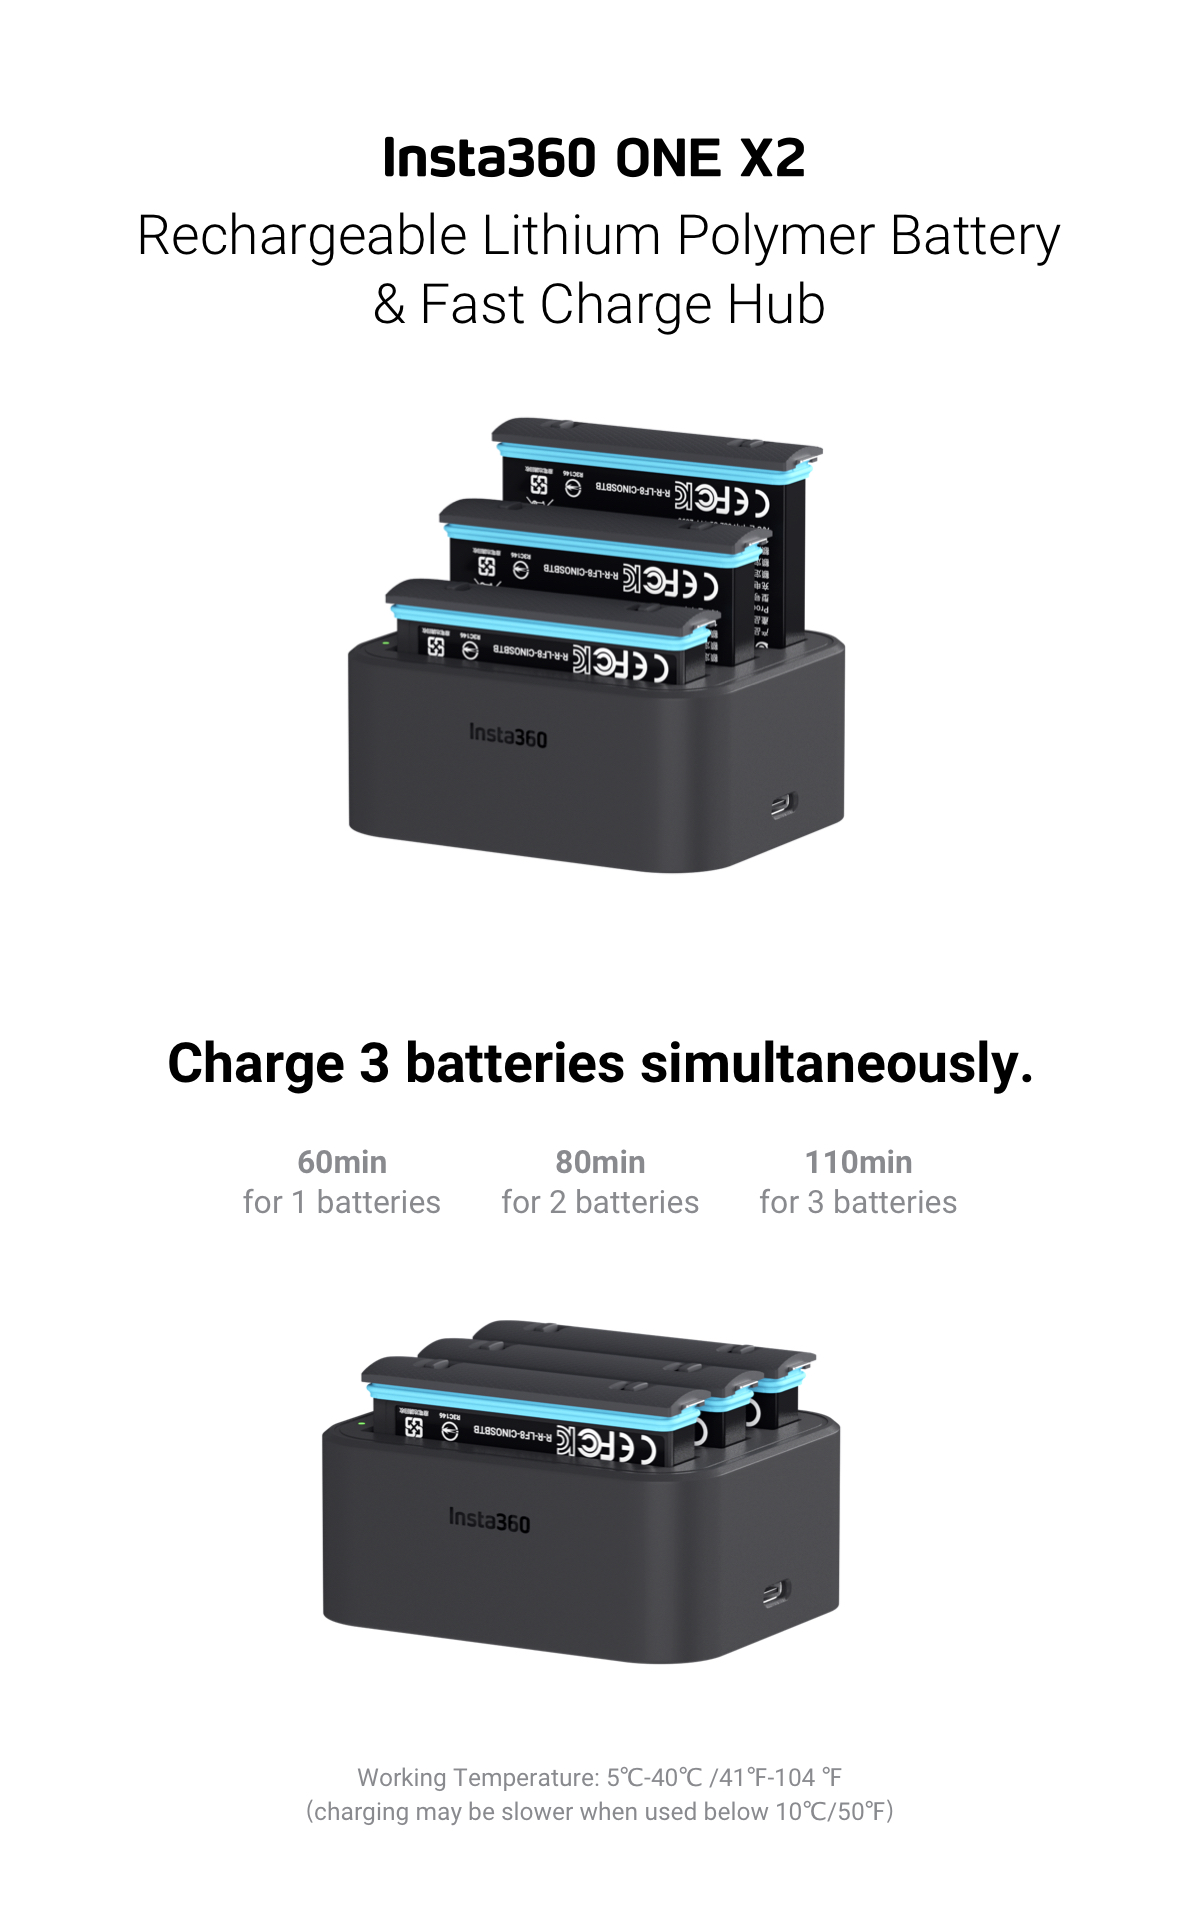 Charge up to 3 batteries simultaneously Insta360 CINX2CB/A ONE X2 Fast Charging Hub 